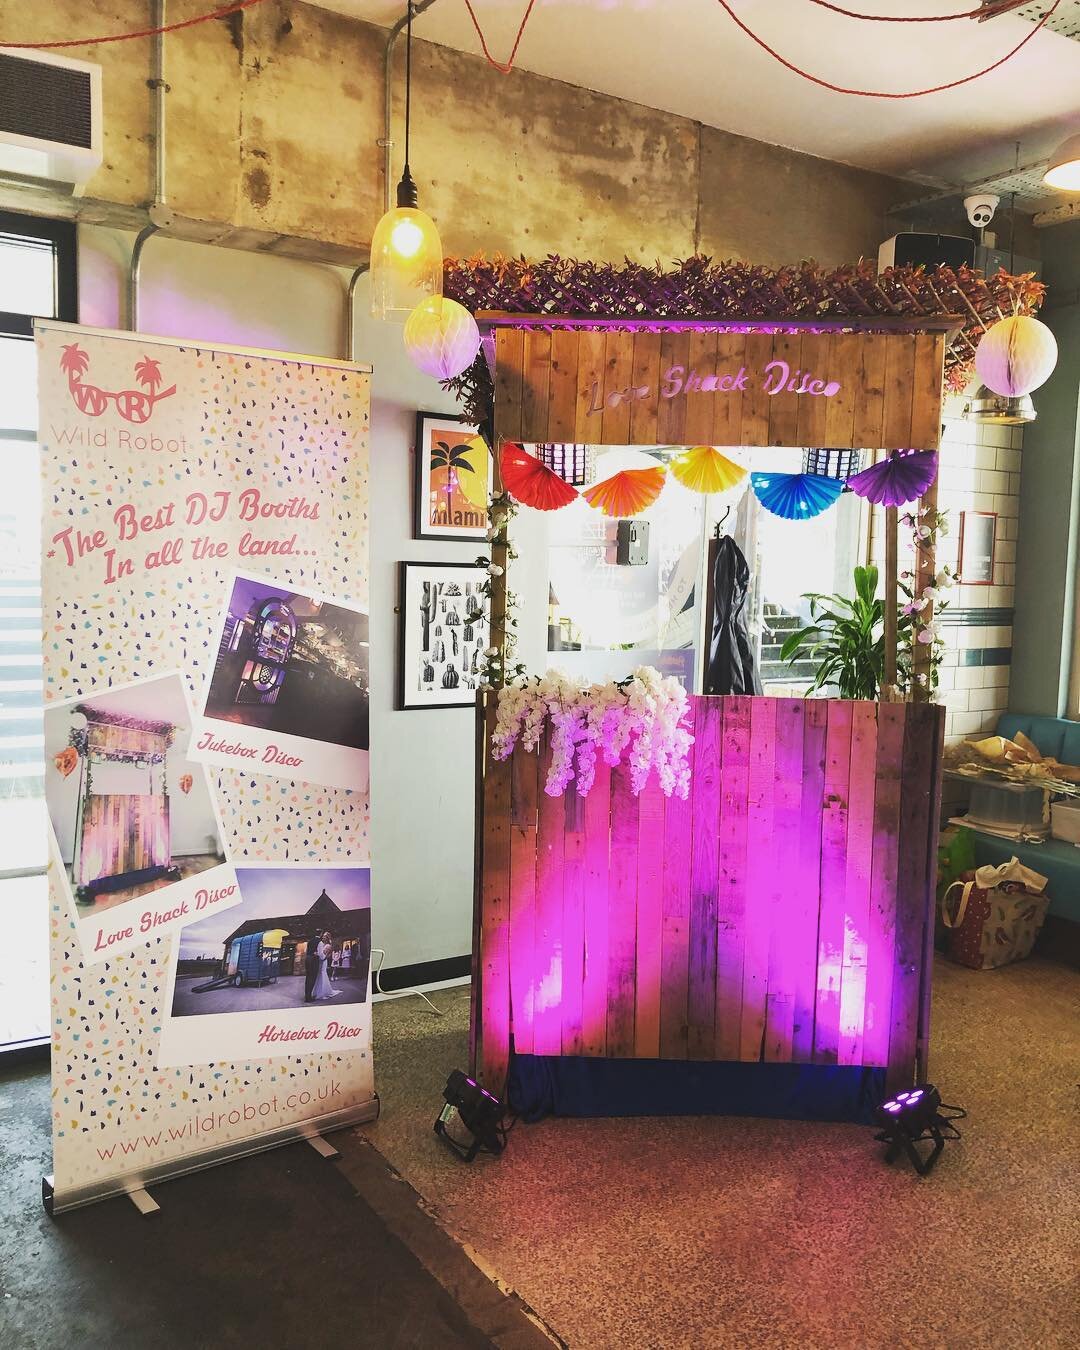 Come see us @bambalanbristol  today for the @duchessweddings  Holy Moly Matrimony - Alternative wedding fair 🙌 
There&rsquo;s some amazing indie suppliers here today 👏👏 #loveshackdisco
#jukeboxdisco
#horseboxdisco 
#weddings 
#weddingdj 
#alternat